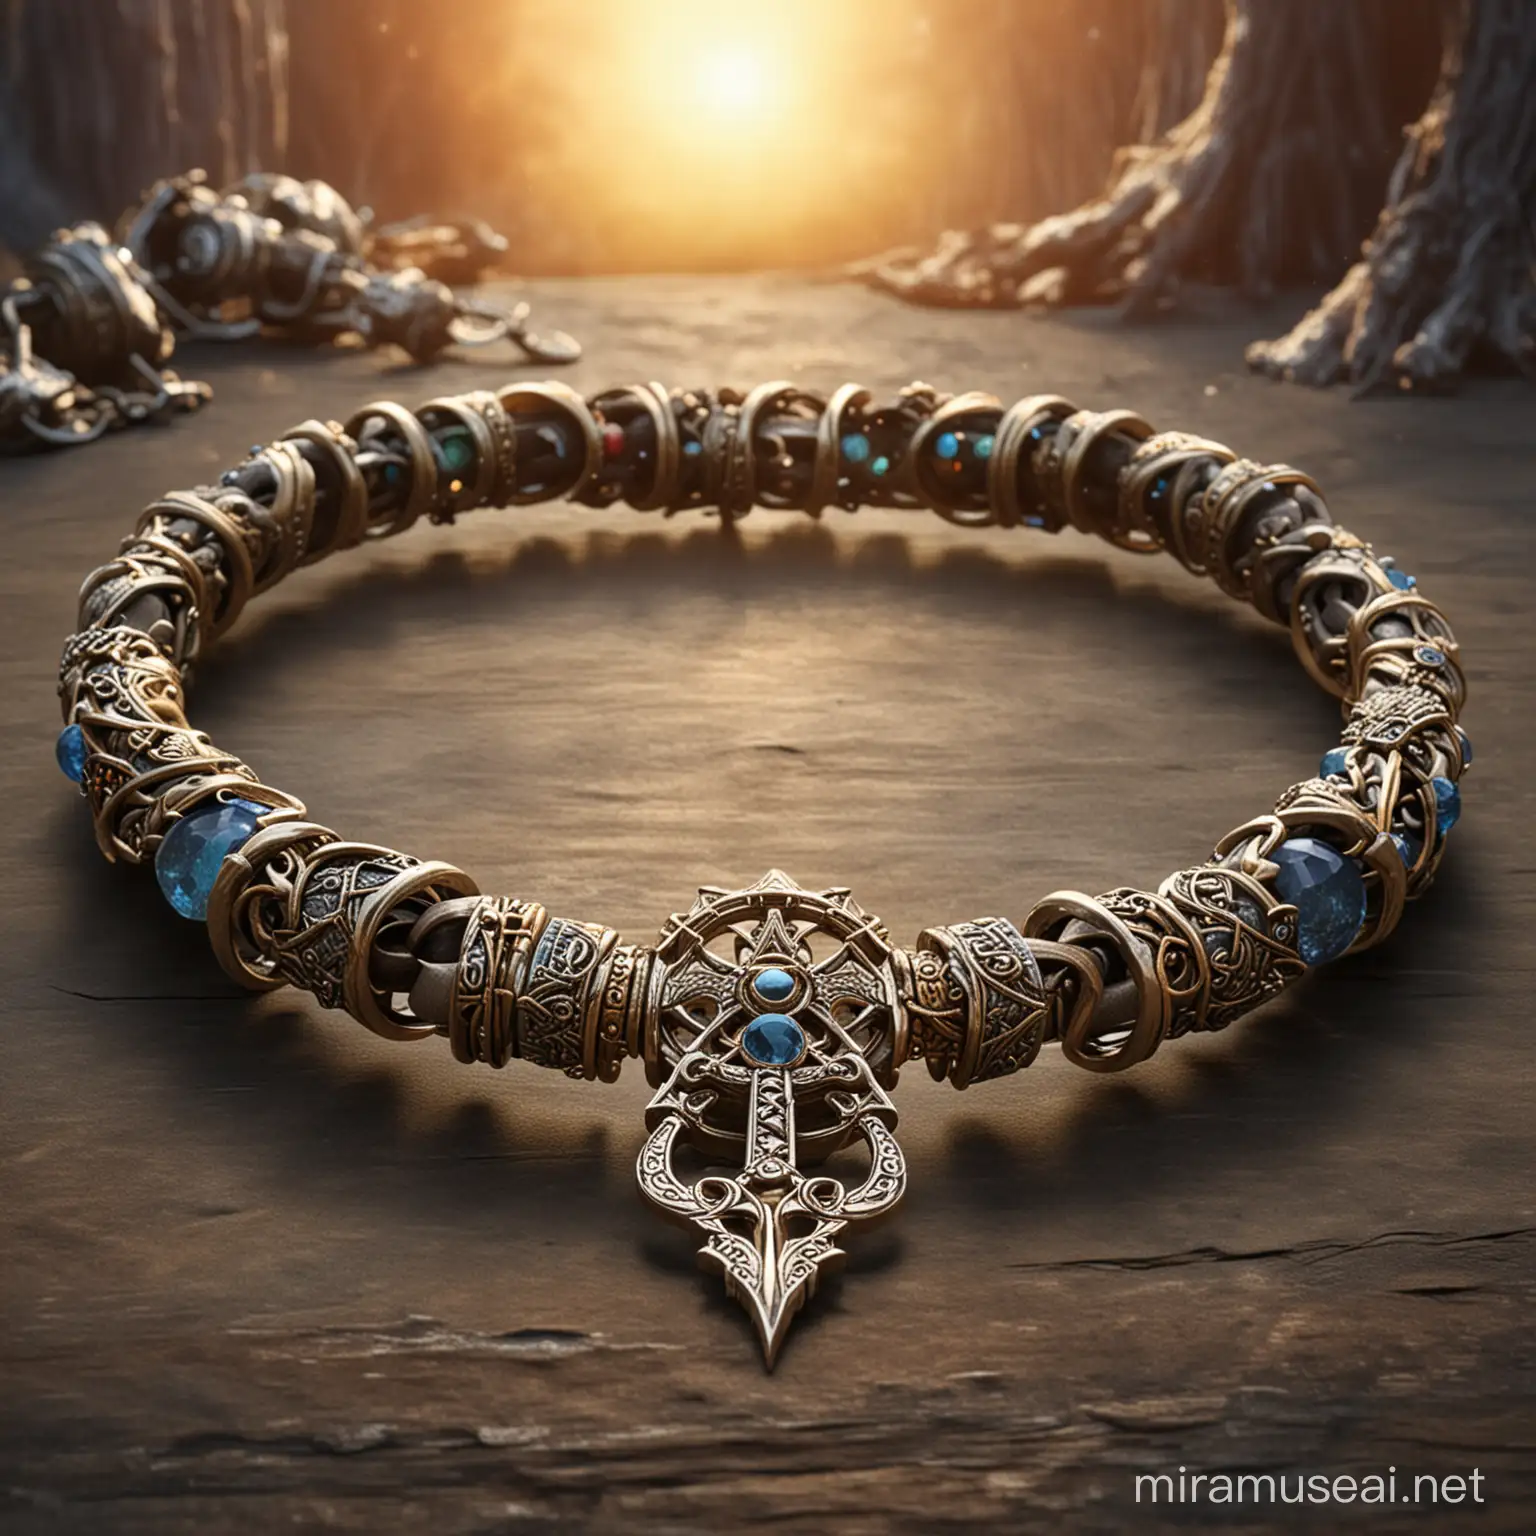 "Unleash the Power Within: In a realm where magic reigns supreme, a mystical bracelet holds the key to unimaginable power. Join our protagonist as they harness the might of the ancients to confront the sinister forces of darkness led by the malevolent antagonist. Brace yourself for an epic journey of courage, sorcery, and destiny as they clash in a battle where the fate of the world hangs in the balance. Will you answer the call to adventure and embrace the magic within?"